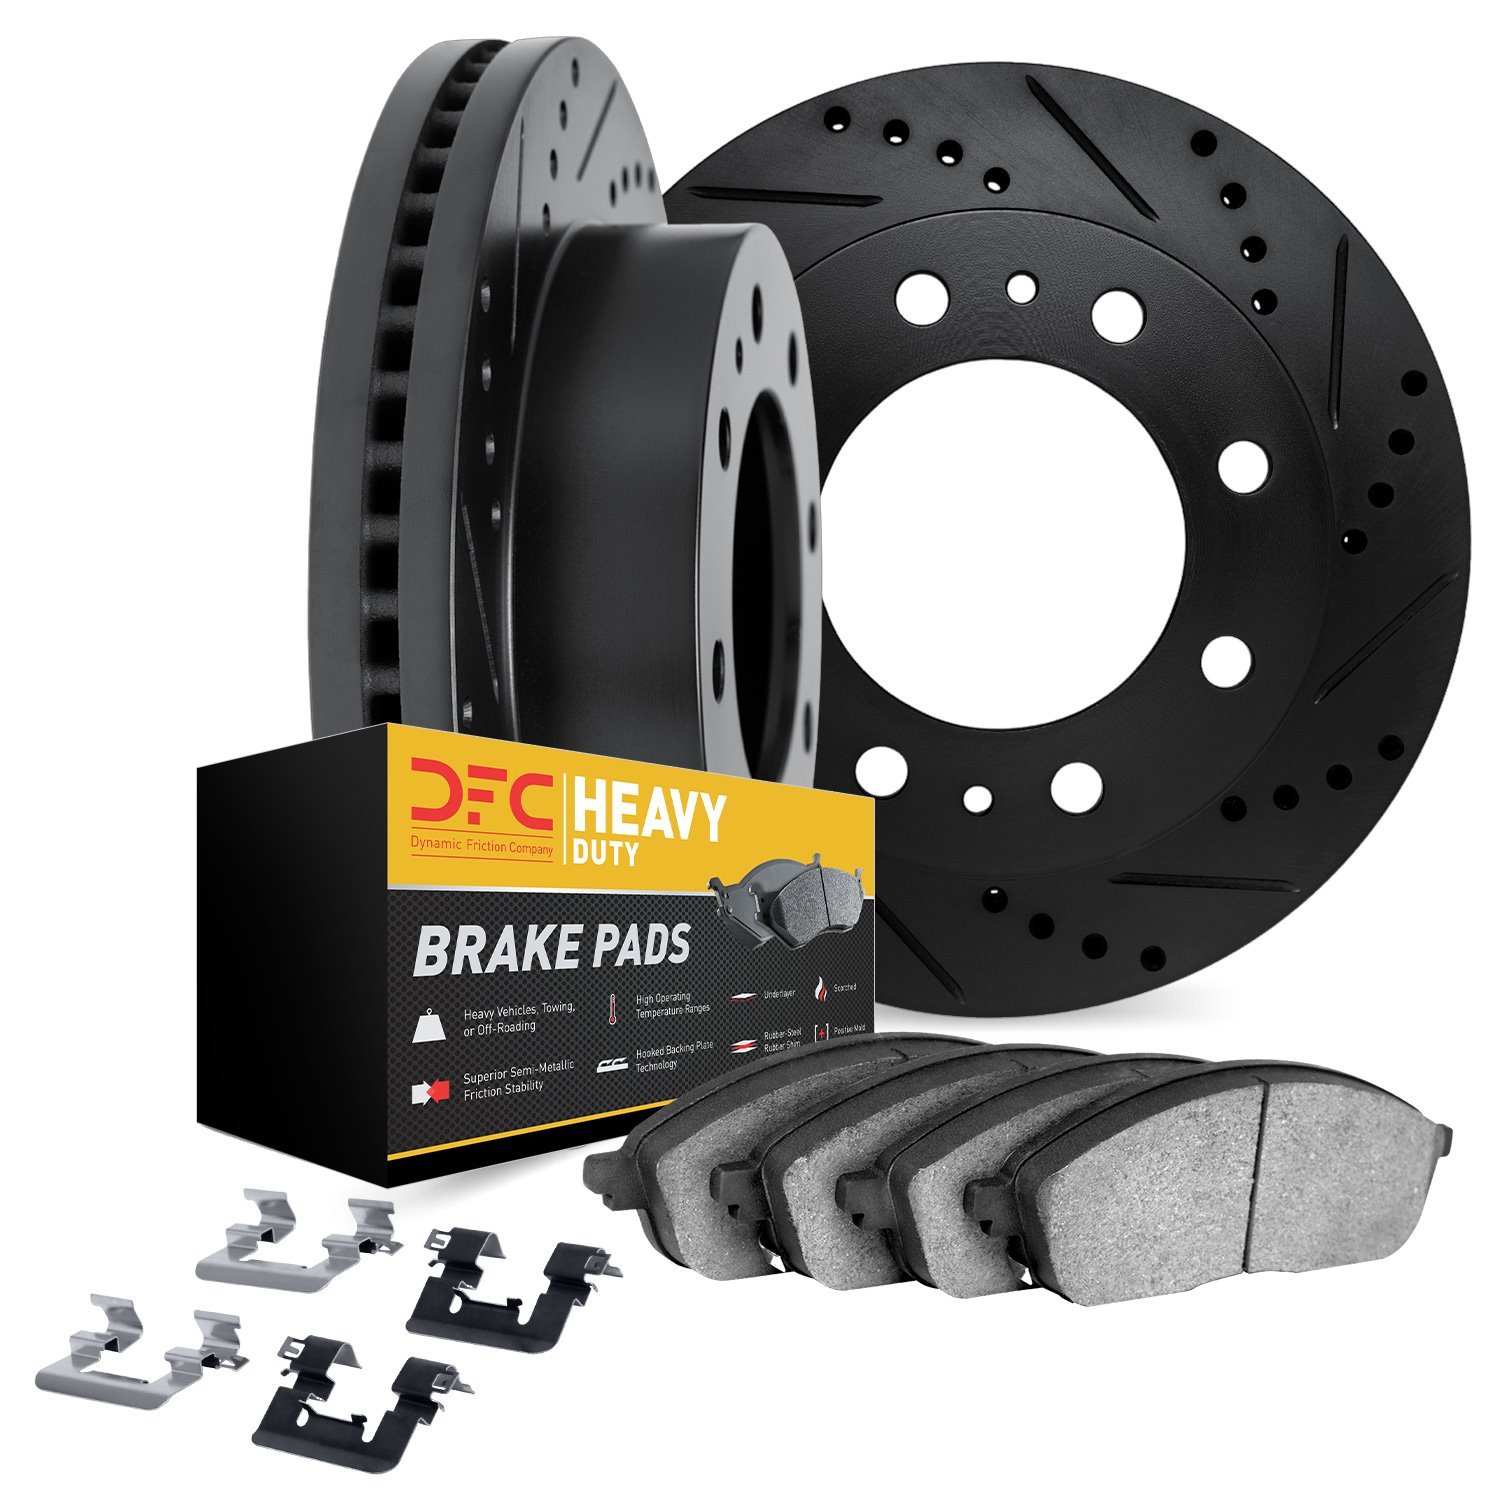 8212-99238 Drilled/Slotted Rotors w/Heavy-Duty Brake Pads Kit & Hardware [Black], Fits Select Ford/Lincoln/Mercury/Mazda, Positi